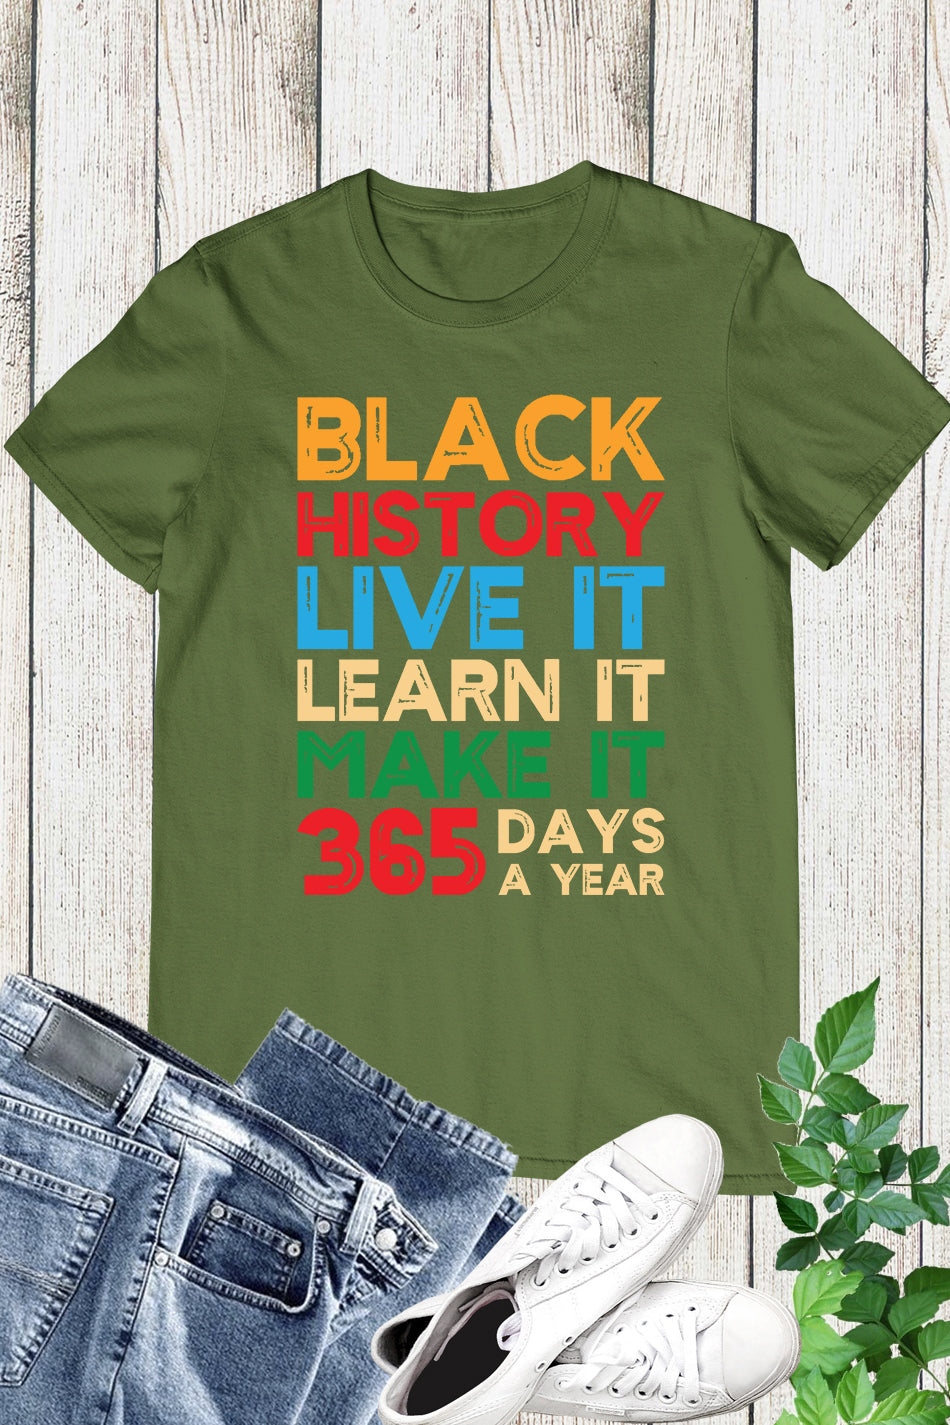 Black History Live it Learn It Make it 365 Days a Year Tees